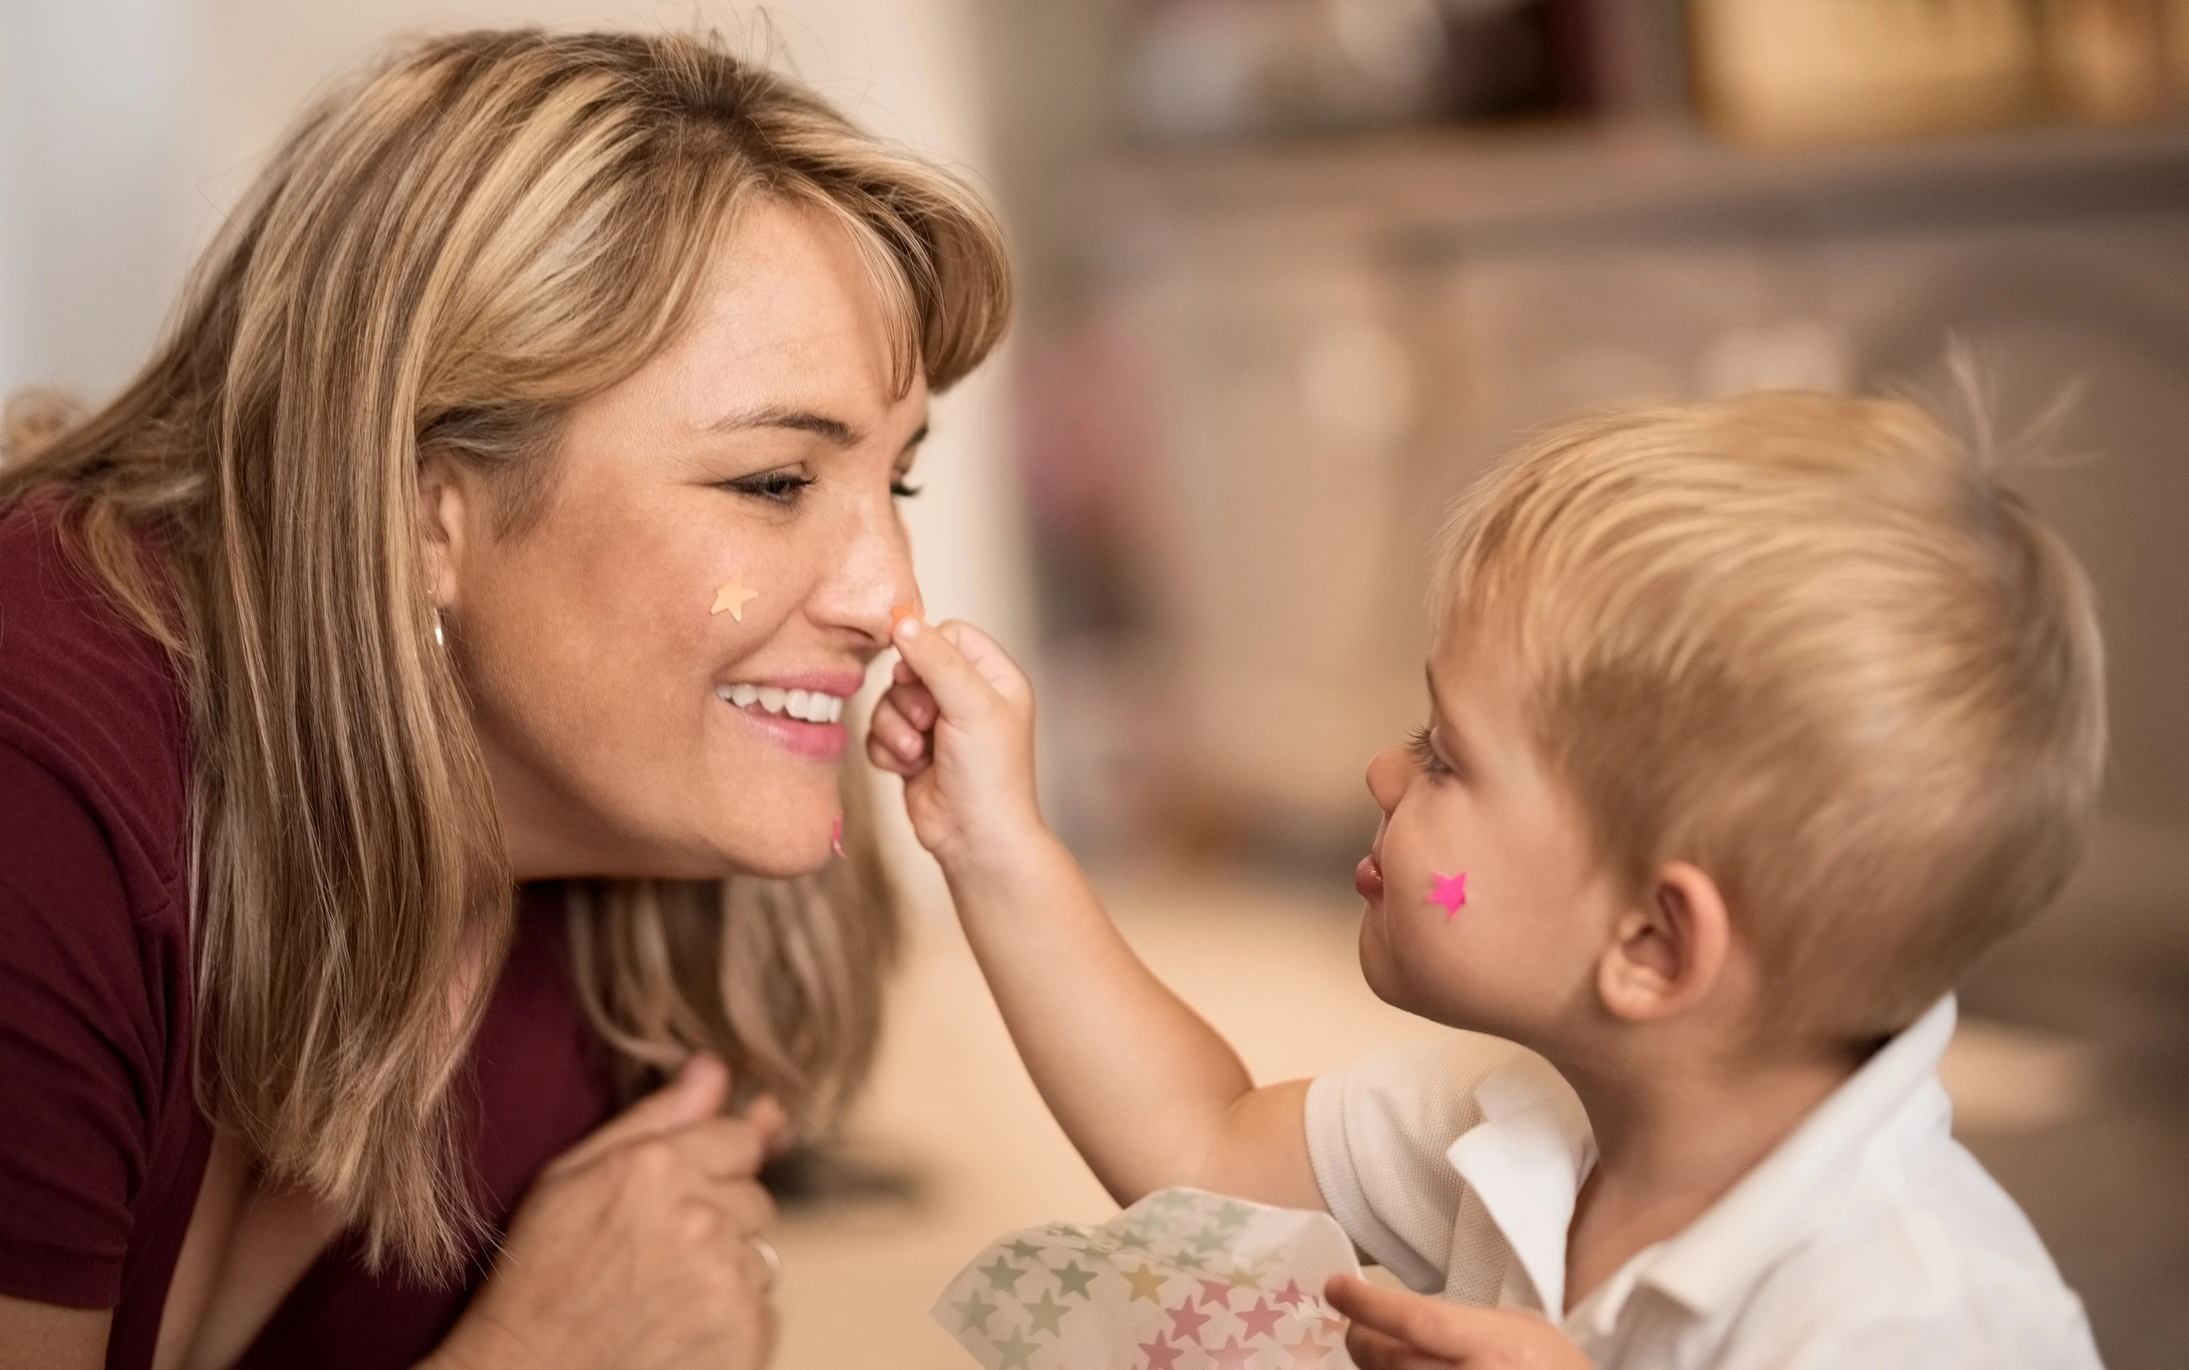 Shot of little boy placing star stickers on mother's face at home